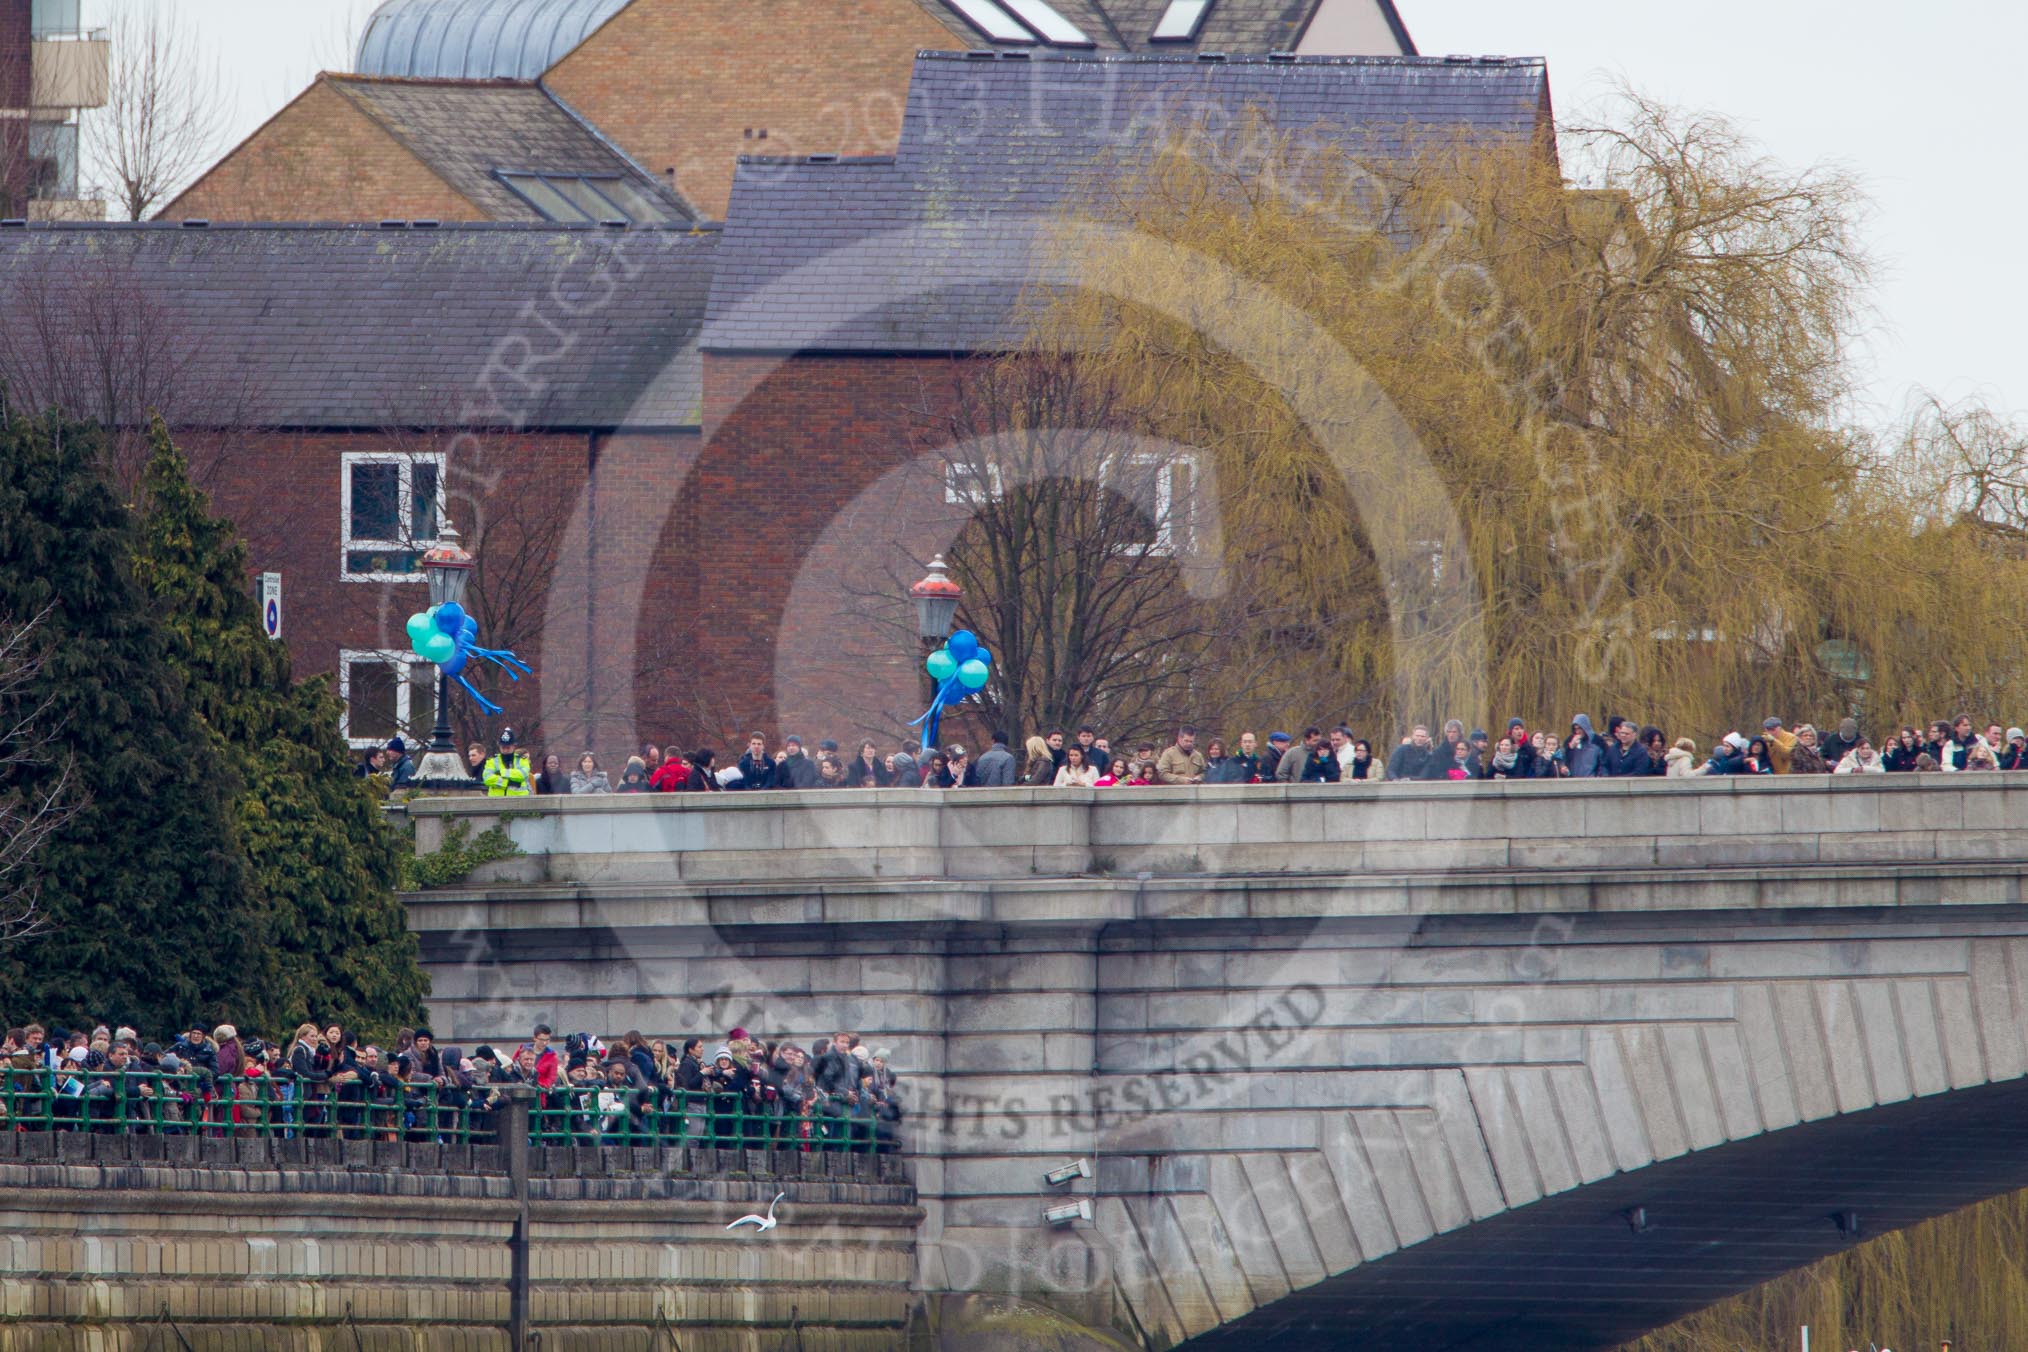 The Boat Race 2013.
Putney,
London SW15,

United Kingdom,
on 31 March 2013 at 16:09, image #224